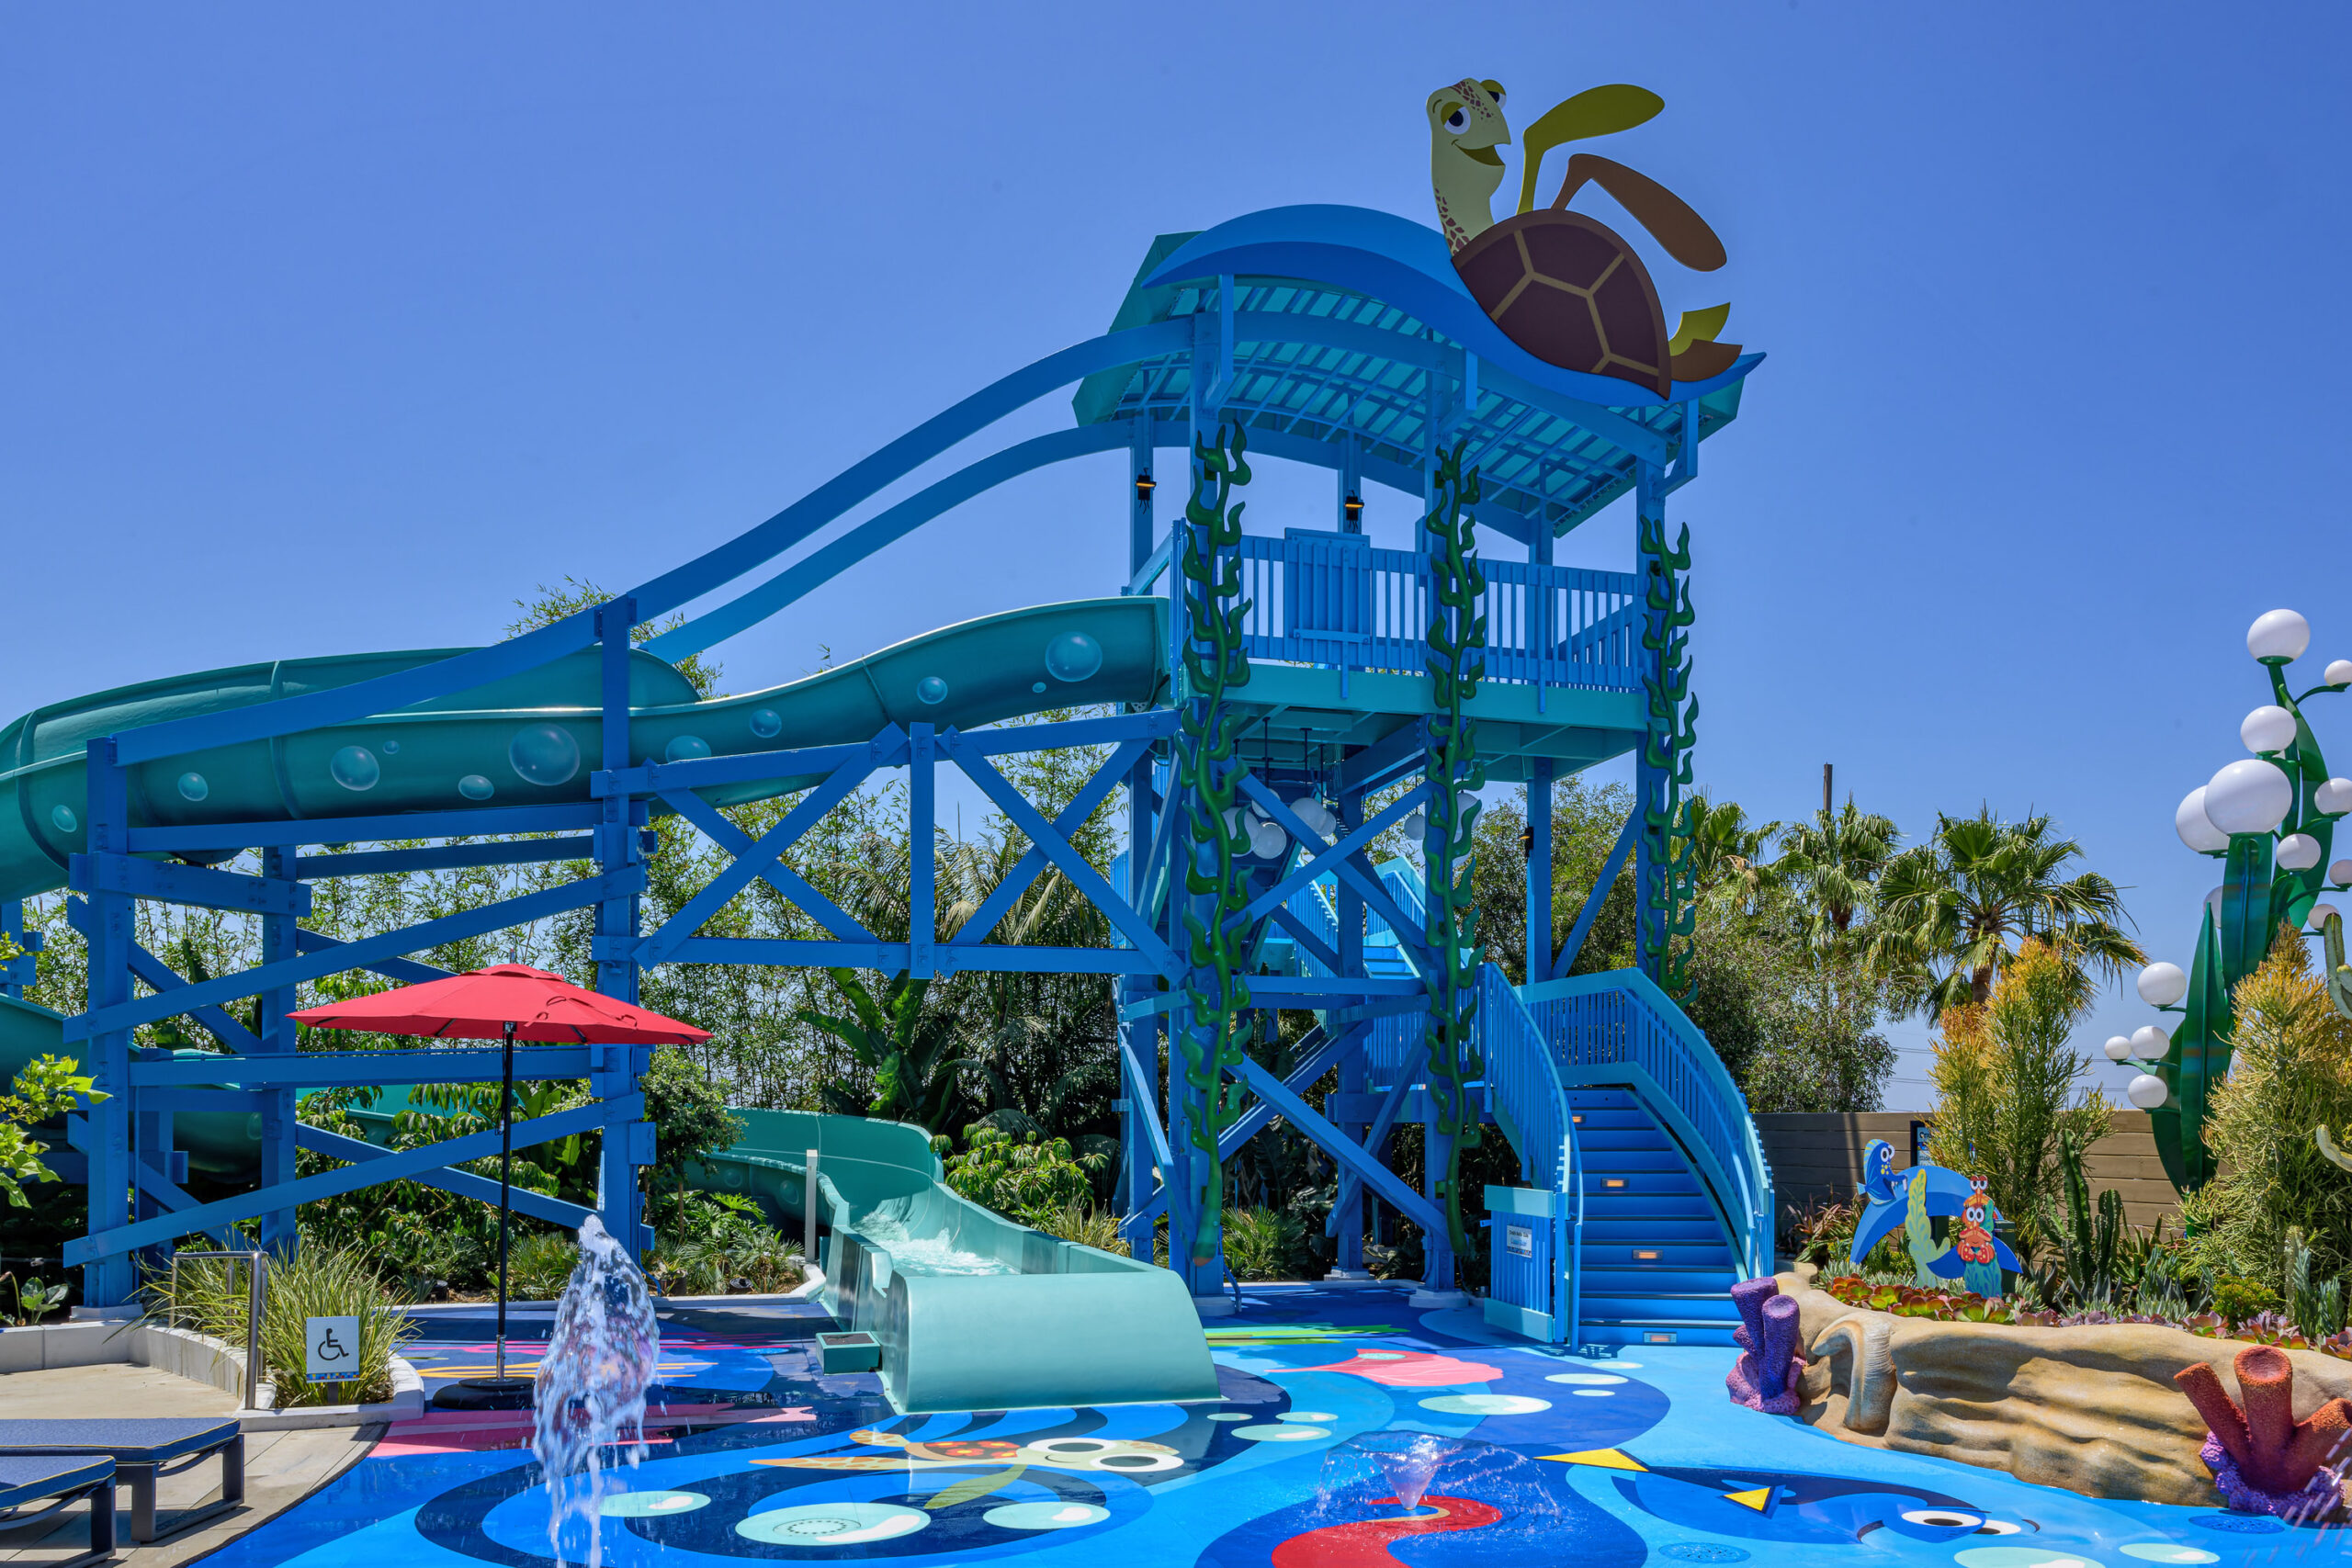 At Pixar Place Hotel at Disneyland Resort in Anaheim, Calif., hotel guests can enjoy a colorful water play area where families can take a winding water ride down the “Finding Nemo”-inspired Crush’s Surfin’ Slide. (Richard Harbaugh/Disneyland Resort)